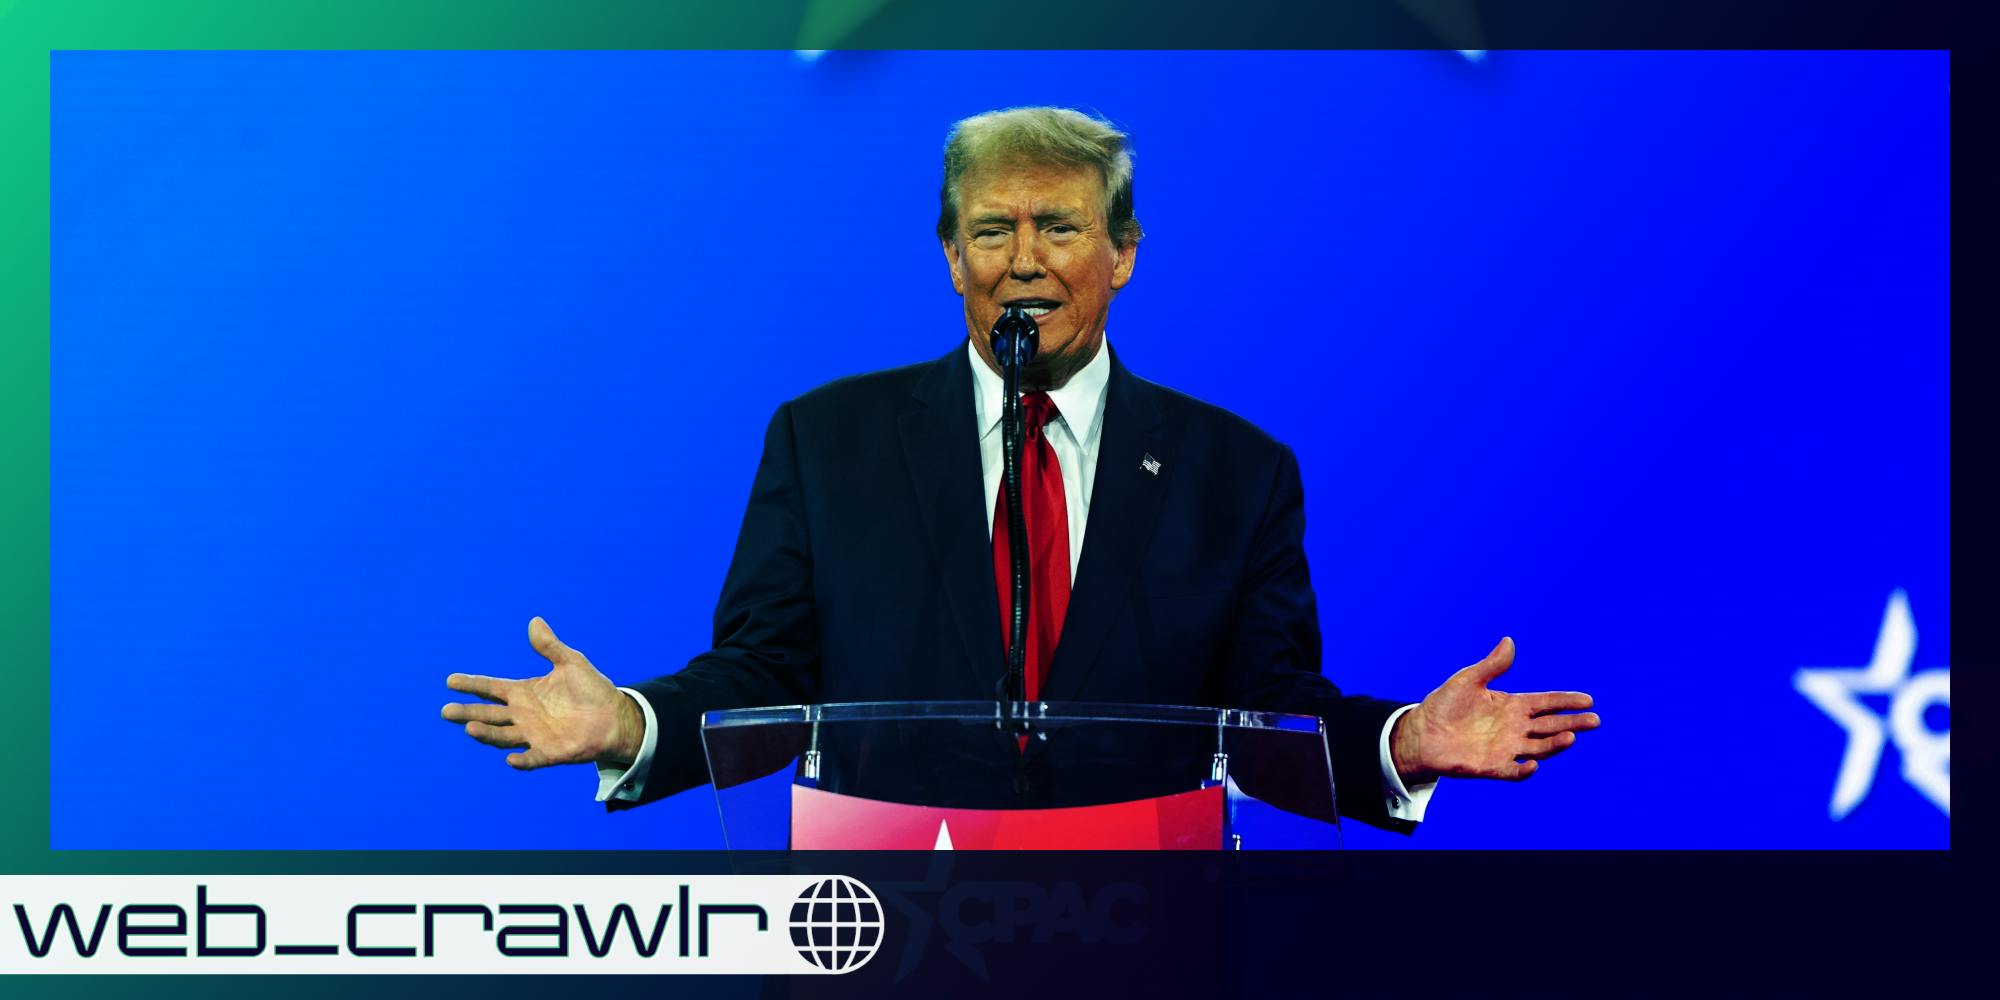 Trump with his arms stretched out. The Daily Dot newsletter web_crawlr logo is in the bottom left corner.